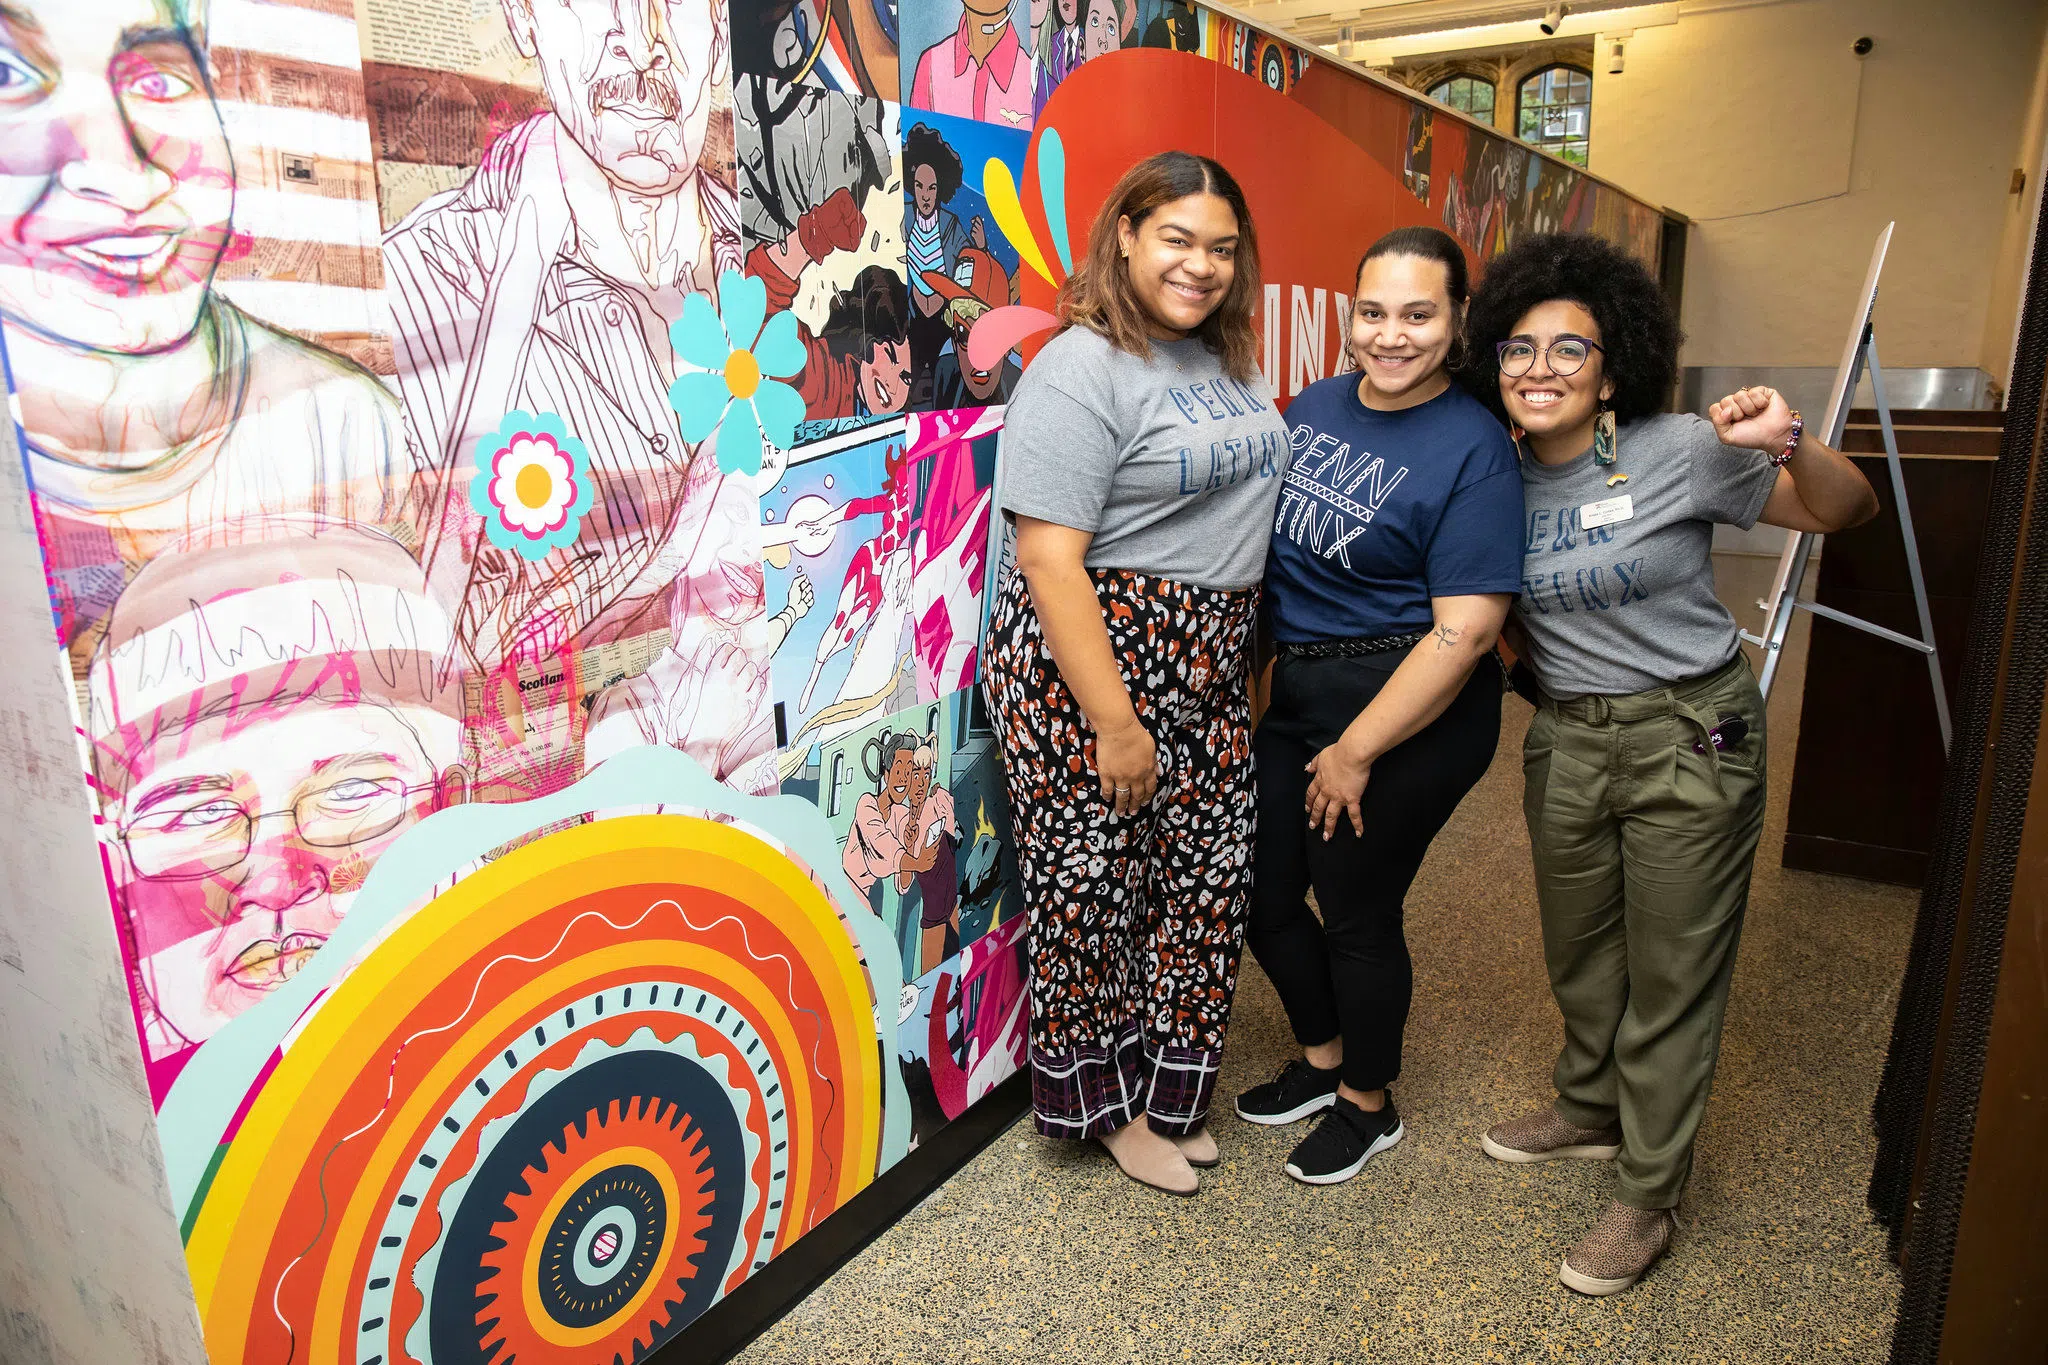 Three women are standing together with grey "Penn Latinx" shirts in front of a mural in the ARCH building. One is holding their fist up as a gesture of solidarity and pride. 